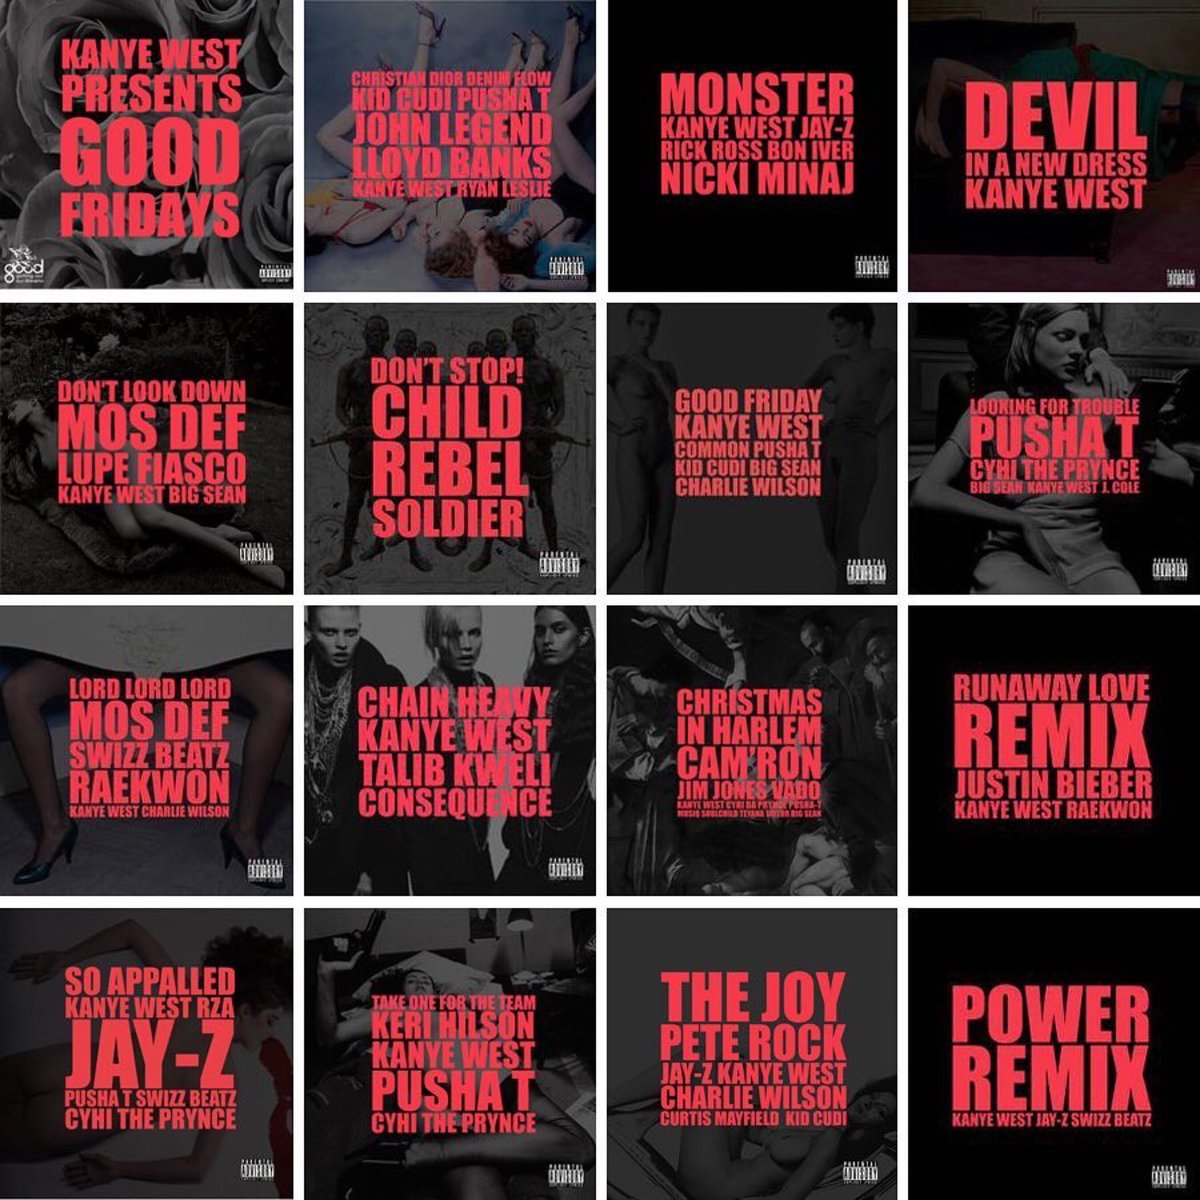 they created so much content during these 6 months that there were extra tracks showcased on GOOD fridays leading up to the release.“power” released on july 1st of 2010. starting on august 20th, kanye released tracks for free on his website every friday leading to the release.